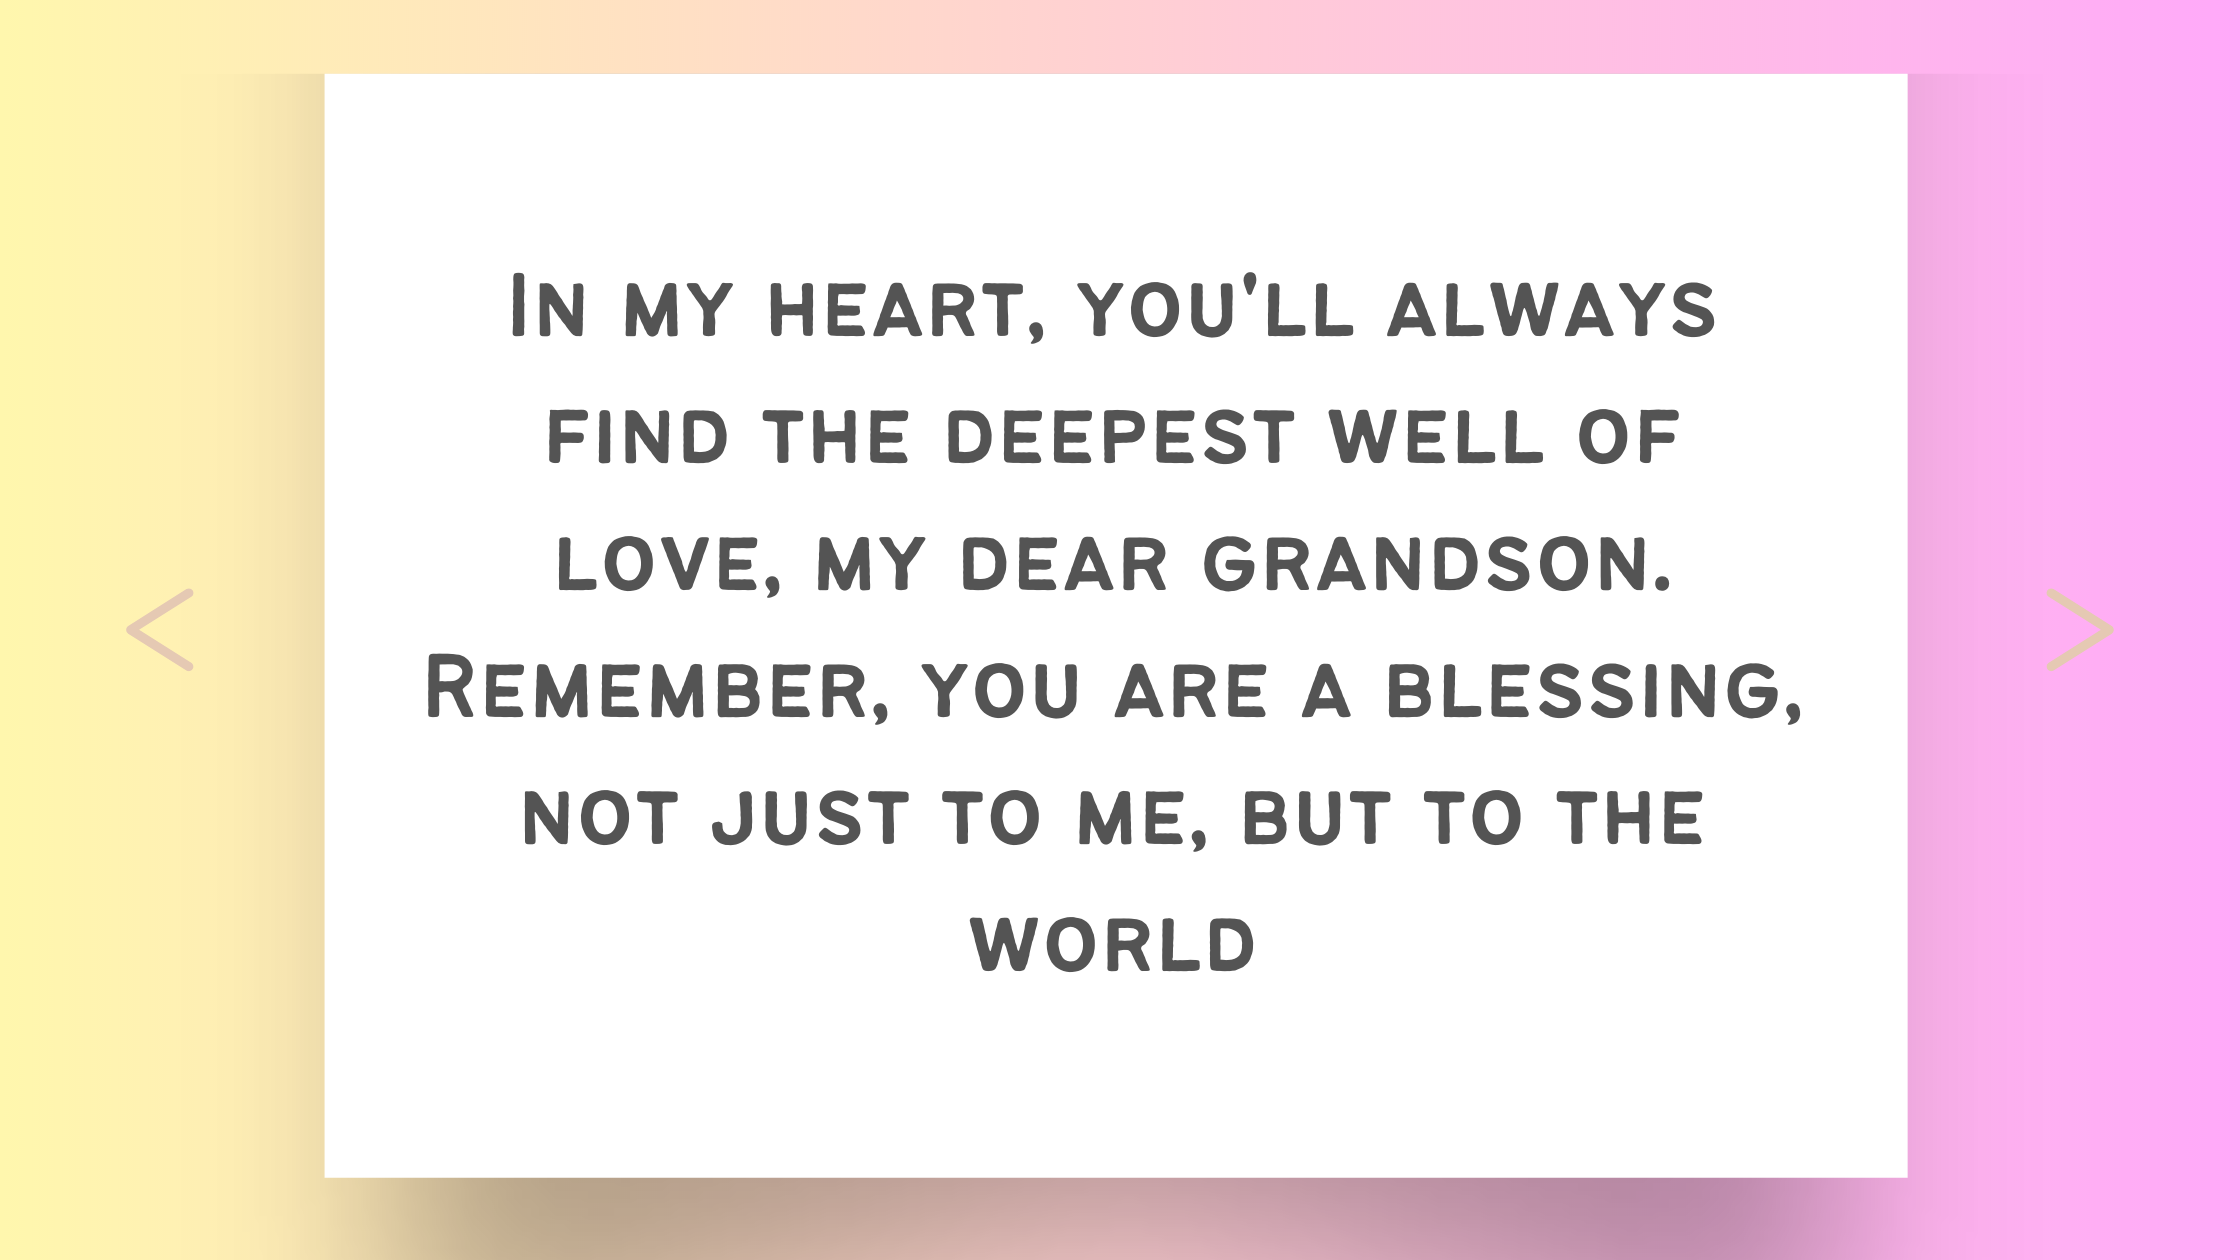 10 Heartfelt Quotes: A Grandmother's Blessing of Special Words for her Grandson